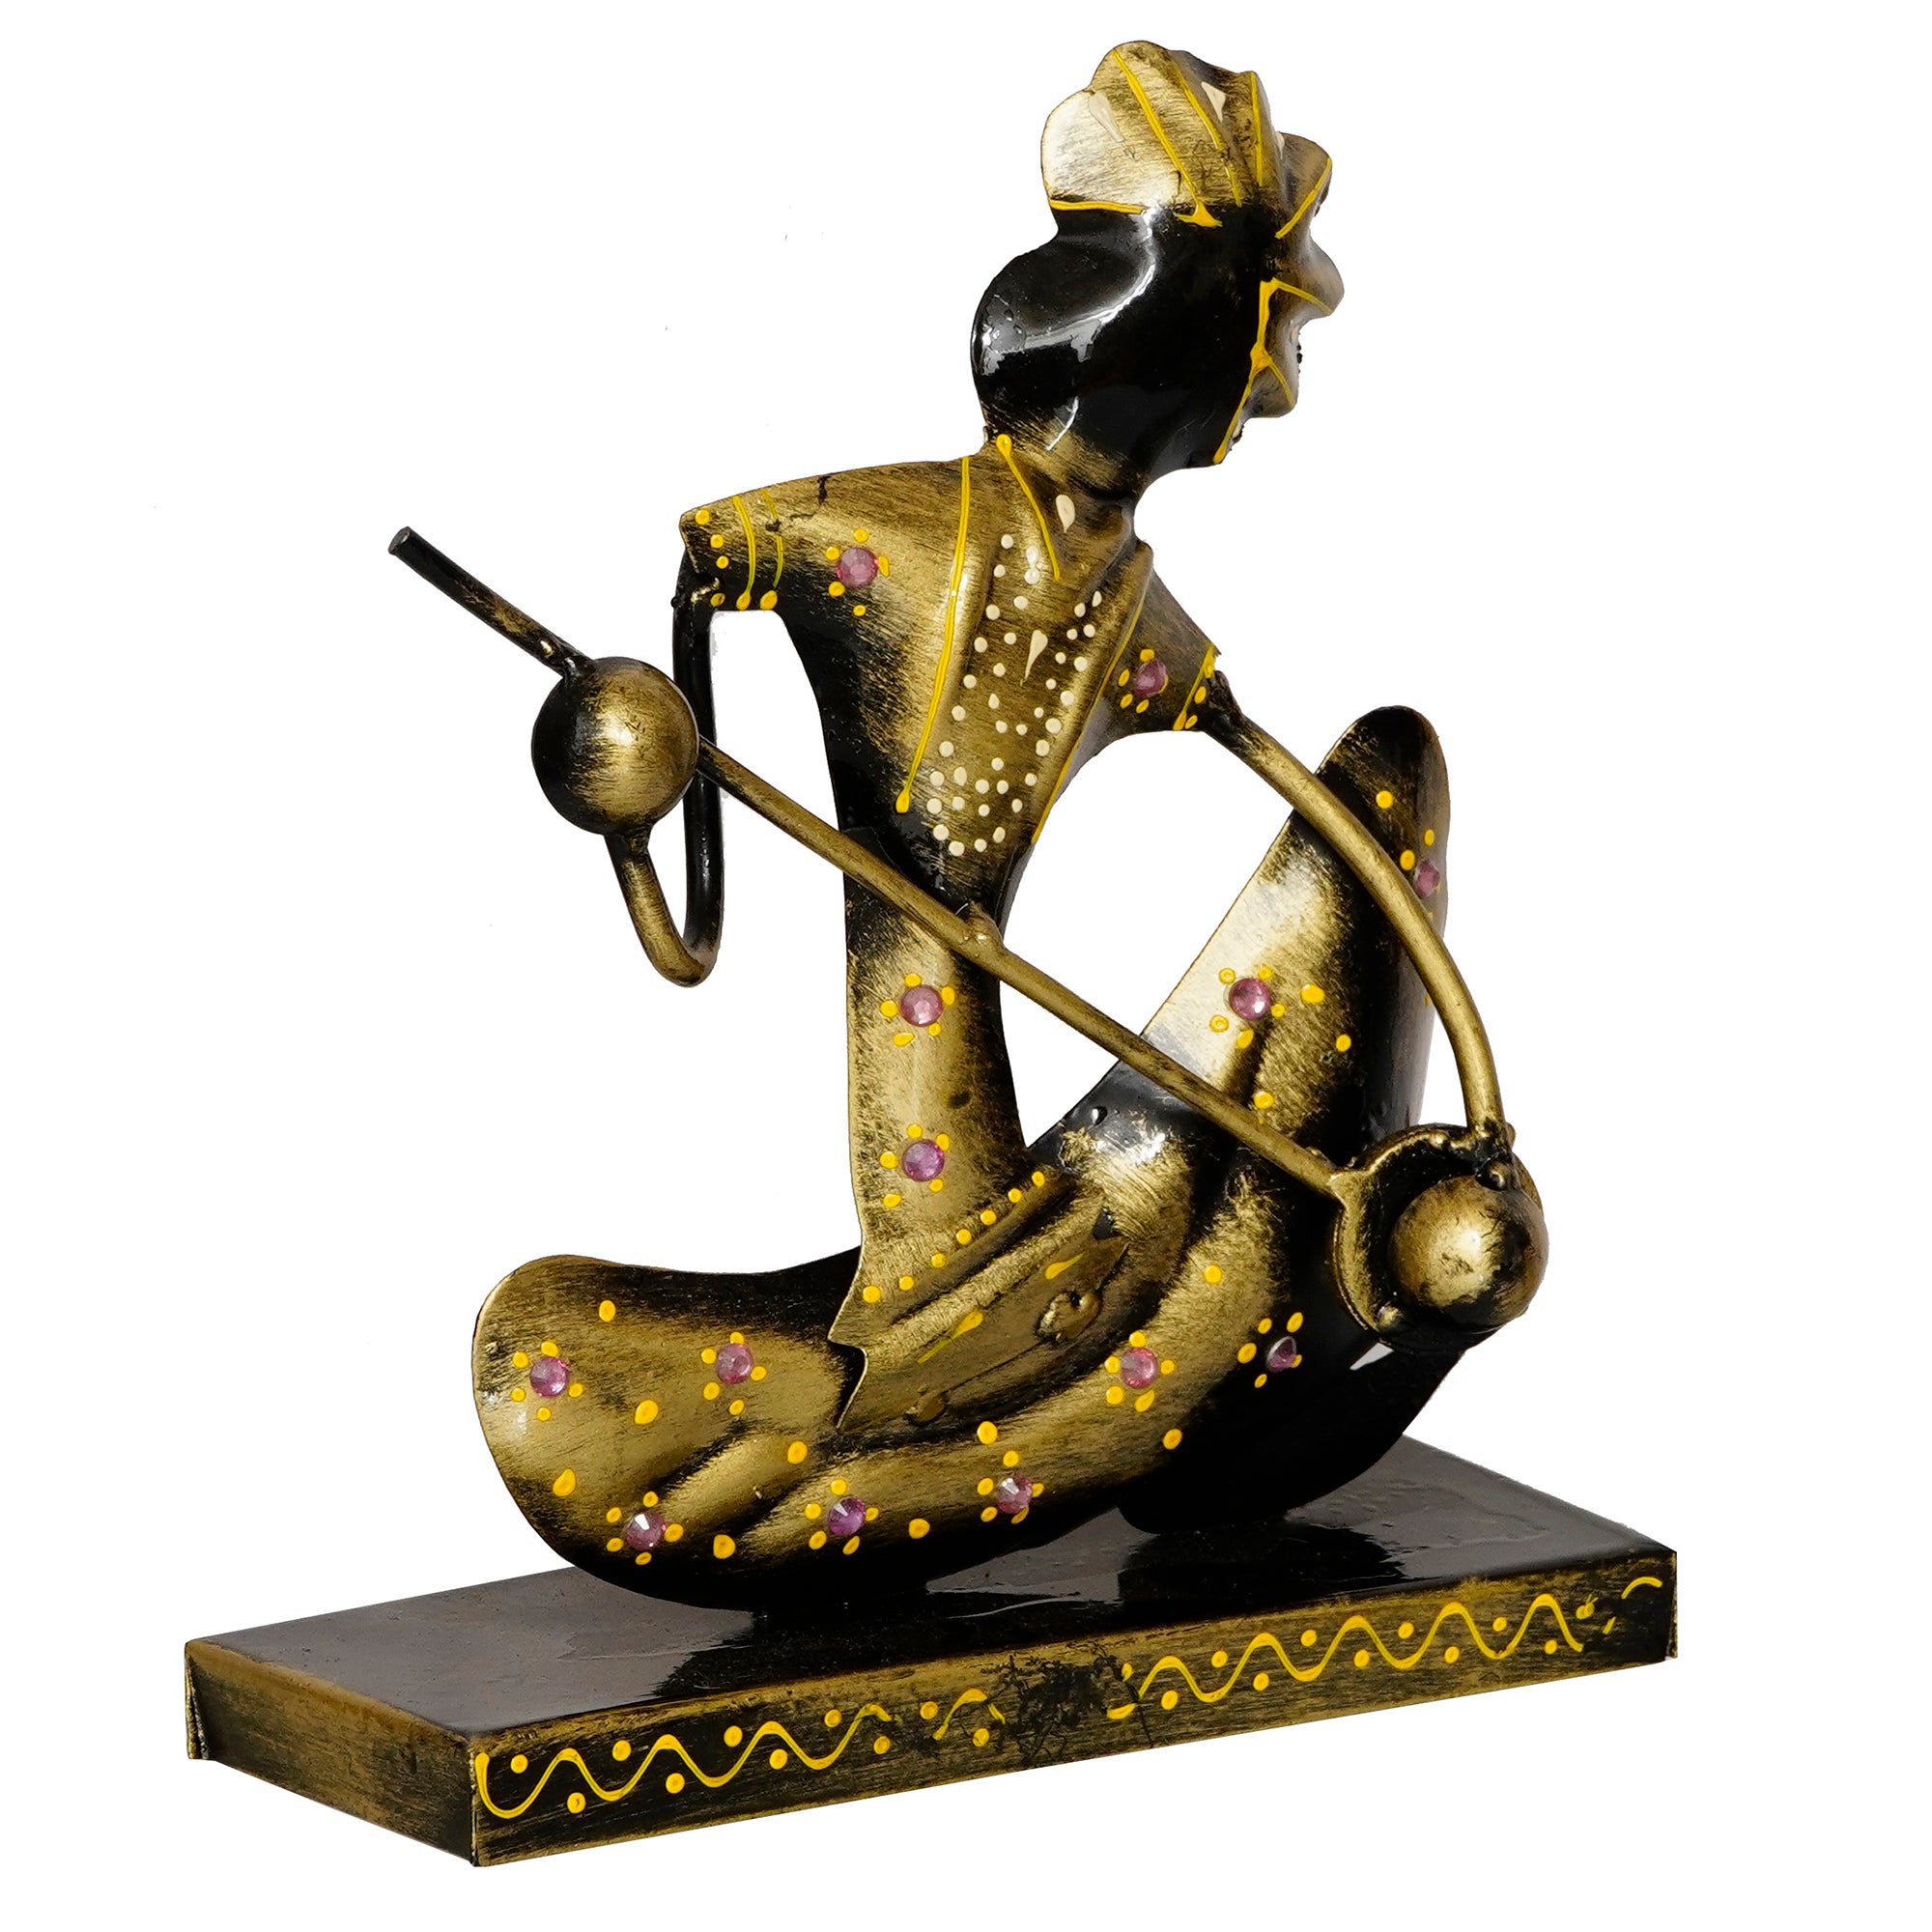 Iron Tribal Man Figurine with Paghdi Playing Banjo Musical Instrument Decorative Showpiece (Golden and Black) 2